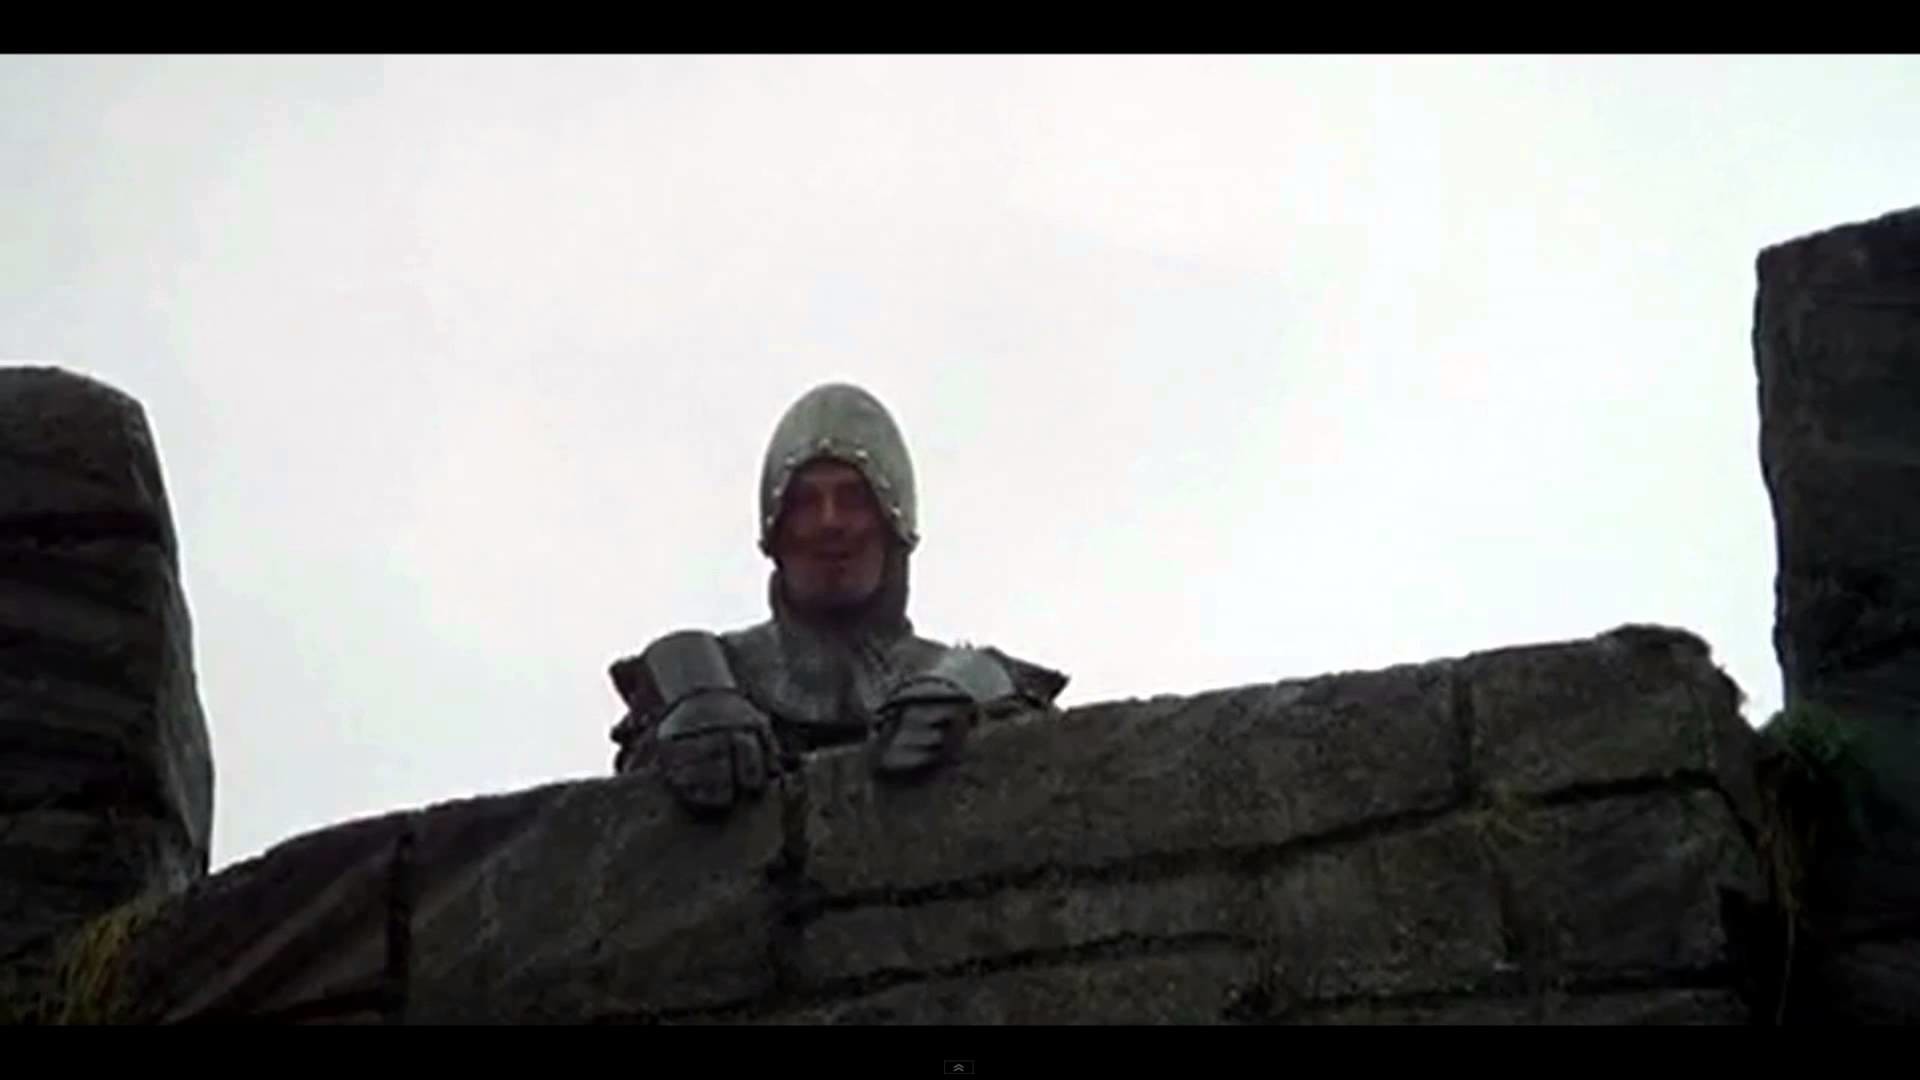 1920x1080 Frenchies Taunting Eanglish - Monty Python - The Holy Grail 1080p HD wide  screen 16:9